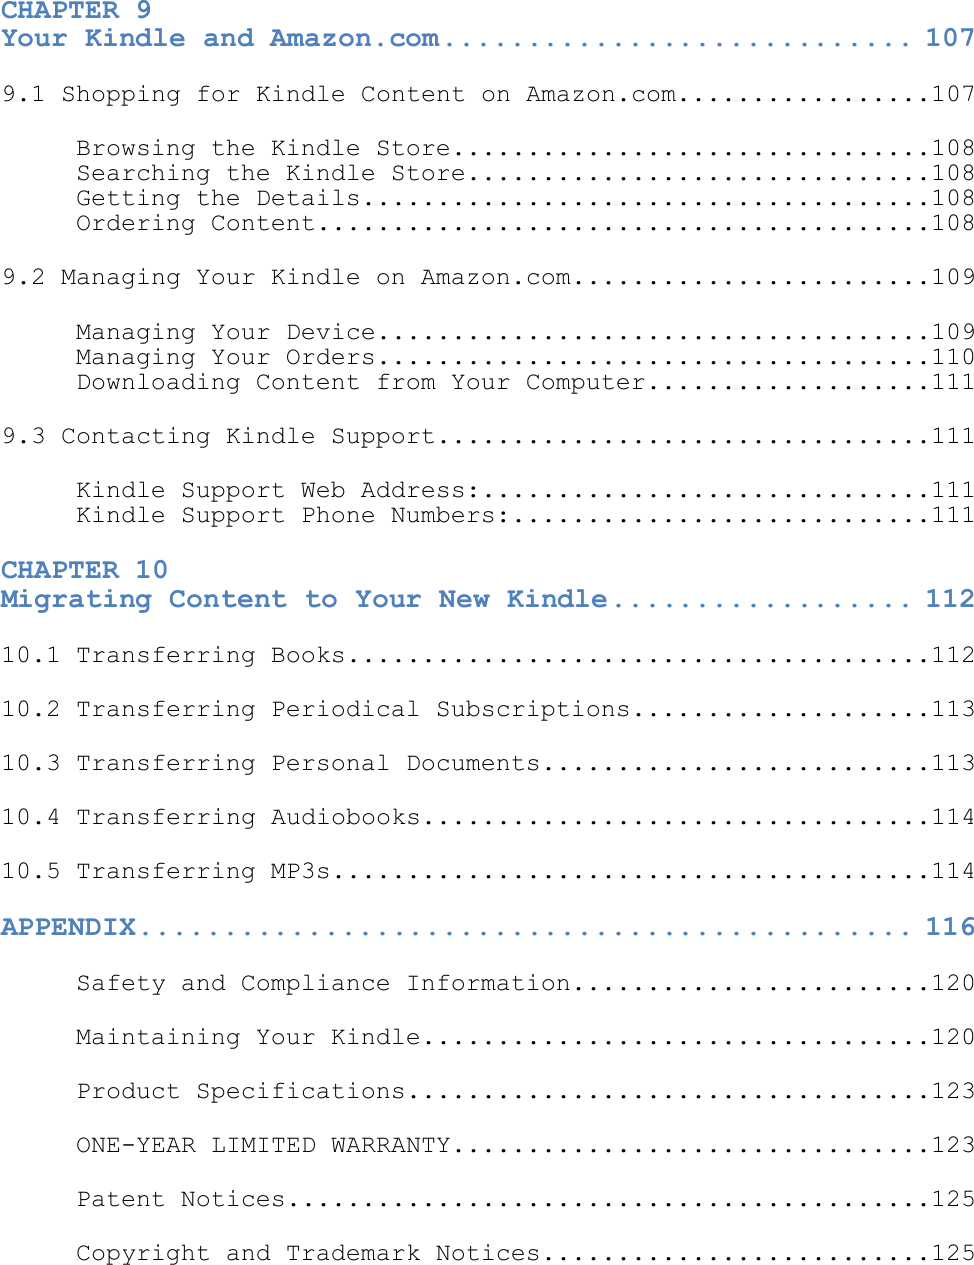   CHAPTER 9  Your Kindle and Amazon.com ............................ 107 9.1 Shopping for Kindle Content on Amazon.com.................107 Browsing the Kindle Store................................108 Searching the Kindle Store...............................108 Getting the Details......................................108 Ordering Content.........................................108 9.2 Managing Your Kindle on Amazon.com........................109 Managing Your Device.....................................109 Managing Your Orders.....................................110 Downloading Content from Your Computer...................111 9.3 Contacting Kindle Support.................................111 Kindle Support Web Address:..............................111 Kindle Support Phone Numbers:............................111 CHAPTER 10  Migrating Content to Your New Kindle .................. 112 10.1 Transferring Books.......................................112 10.2 Transferring Periodical Subscriptions....................113 10.3 Transferring Personal Documents..........................113 10.4 Transferring Audiobooks..................................114 10.5 Transferring MP3s........................................114 APPENDIX .............................................. 116 Safety and Compliance Information........................120 Maintaining Your Kindle..................................120 Product Specifications...................................123 ONE-YEAR LIMITED WARRANTY................................123 Patent Notices...........................................125 Copyright and Trademark Notices..........................125   